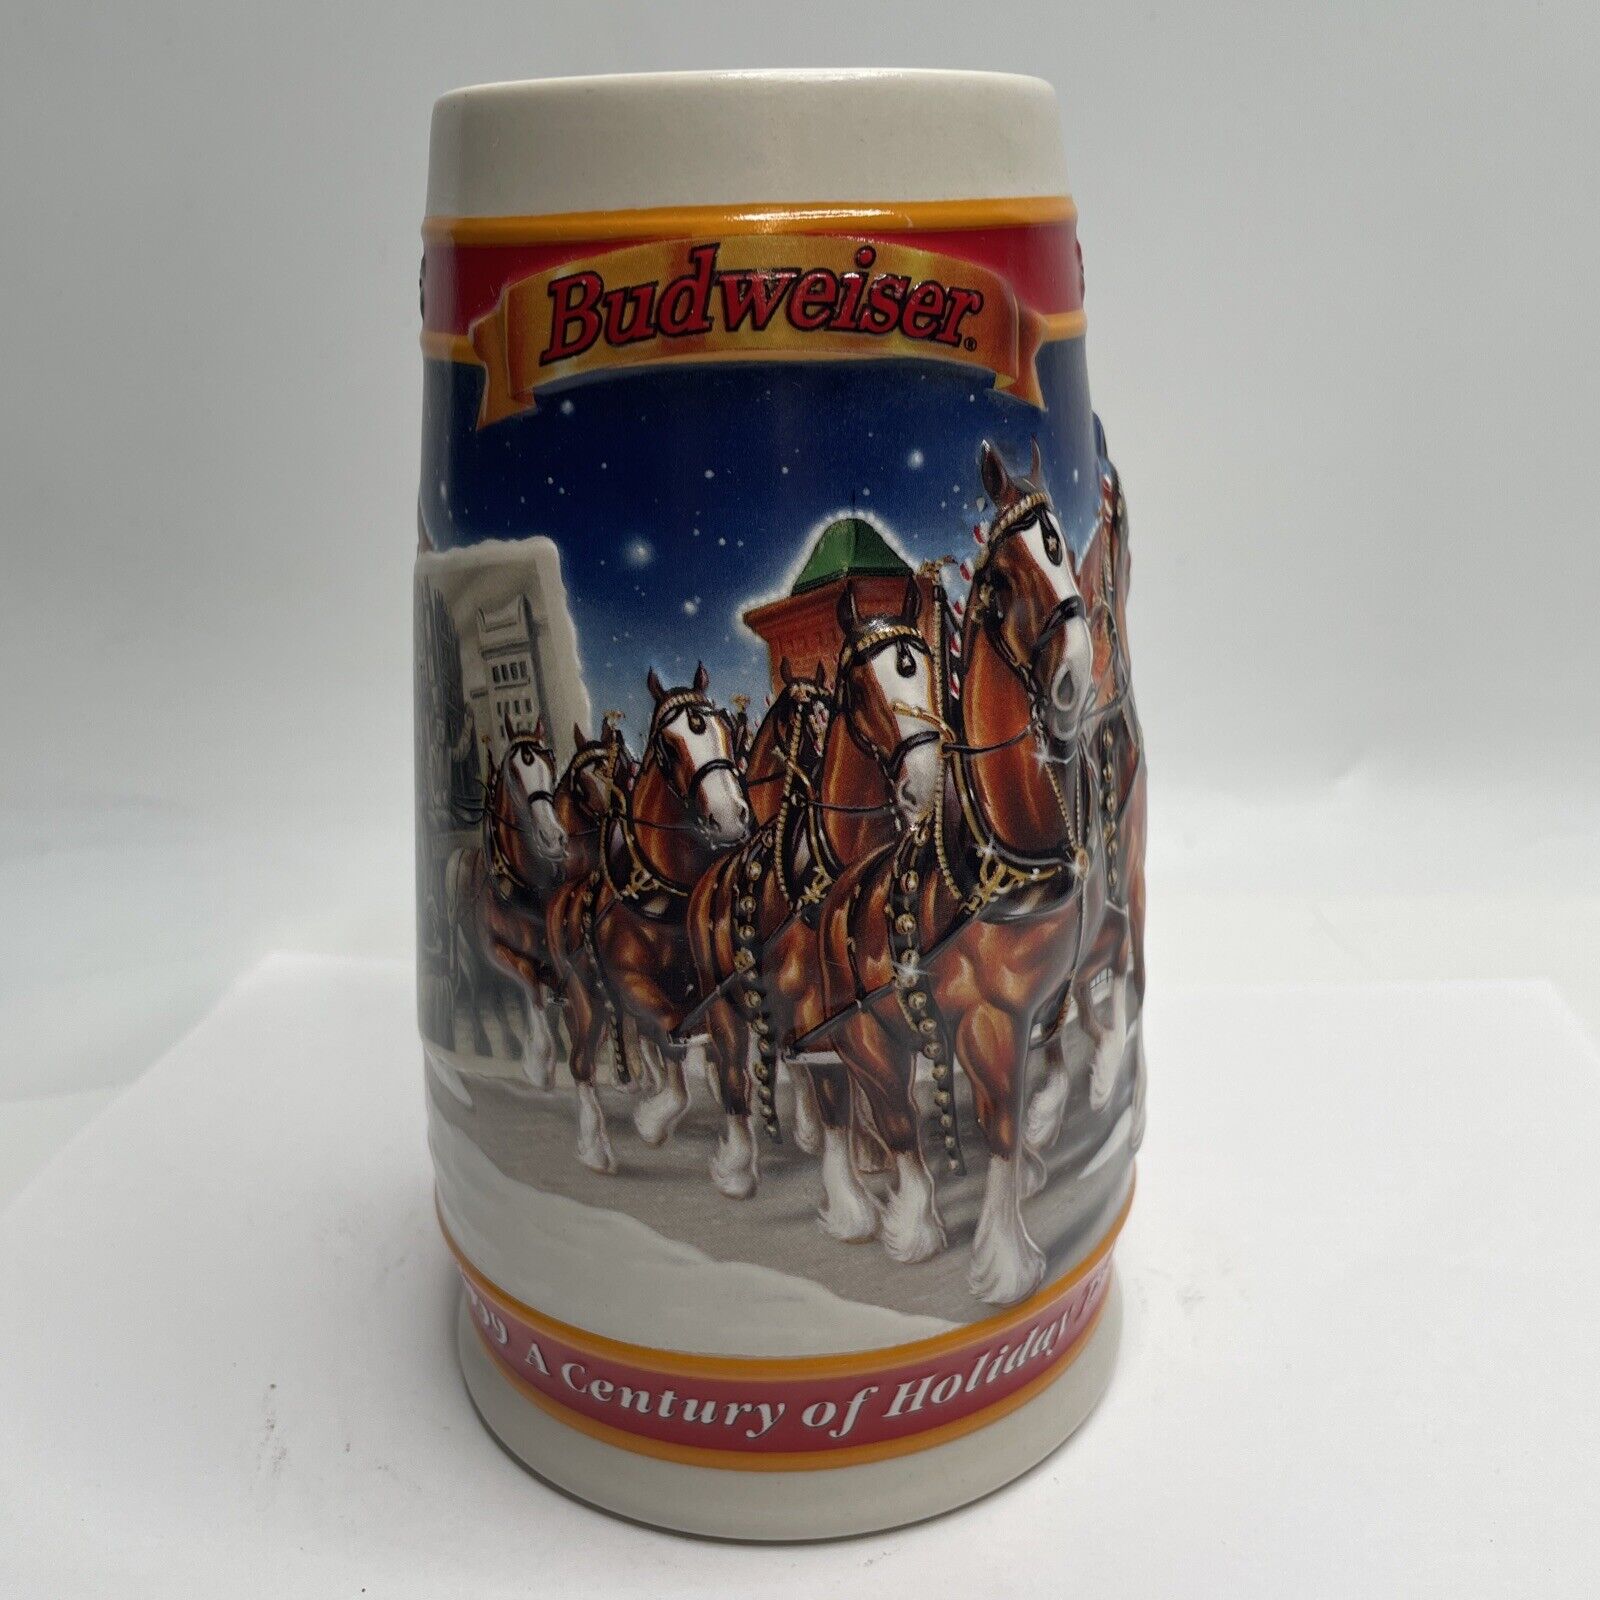 Collectible 1999 Budweiser “A Century Of Tradition” Holiday Beer Stein